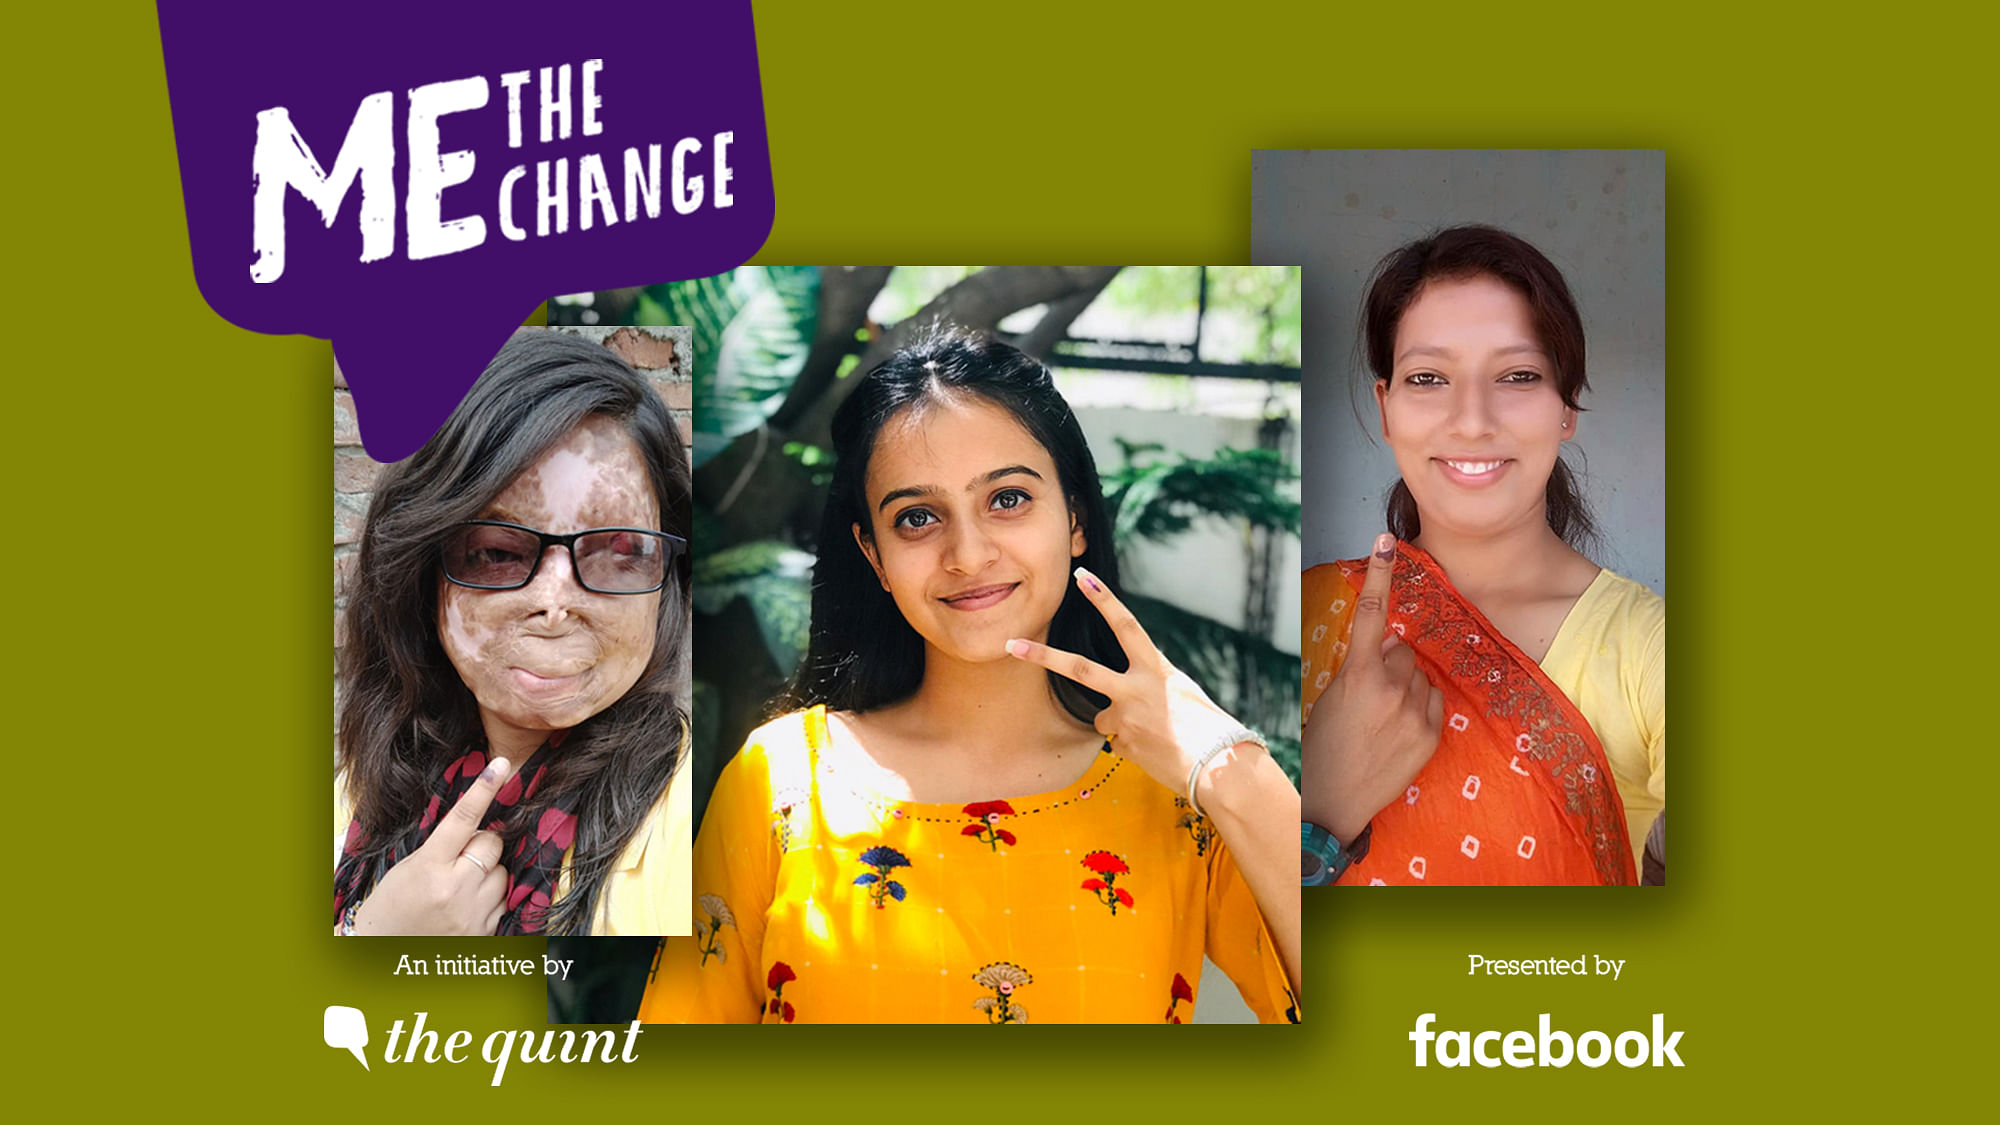 Me, the Change’s achievers voted for the first-time in 2019 polls, and they have a message for you!